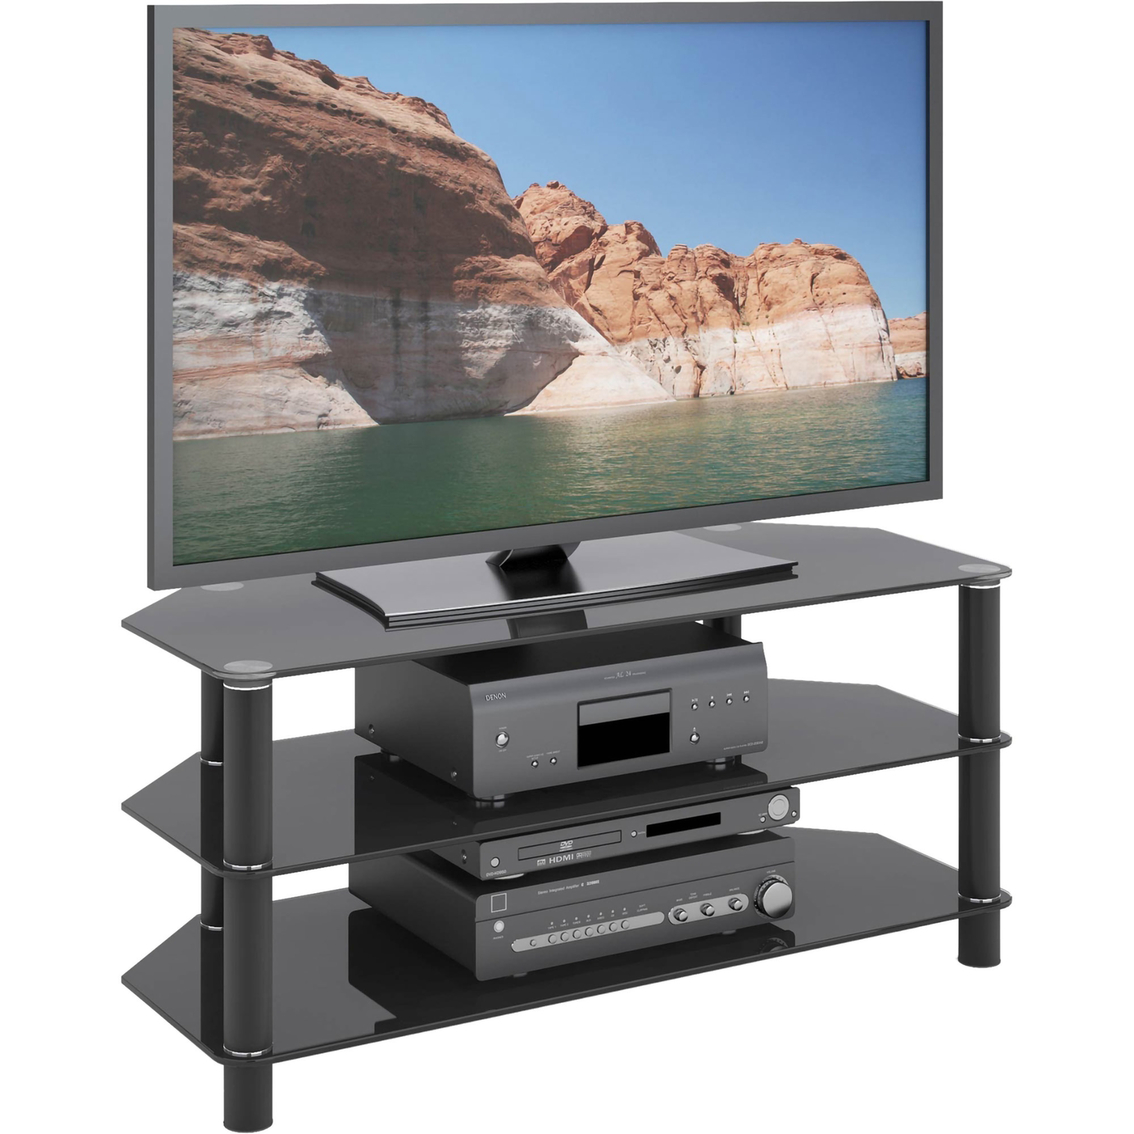 CorLiving Laguna TV Stand for TVs up to 50 in. - Image 2 of 3